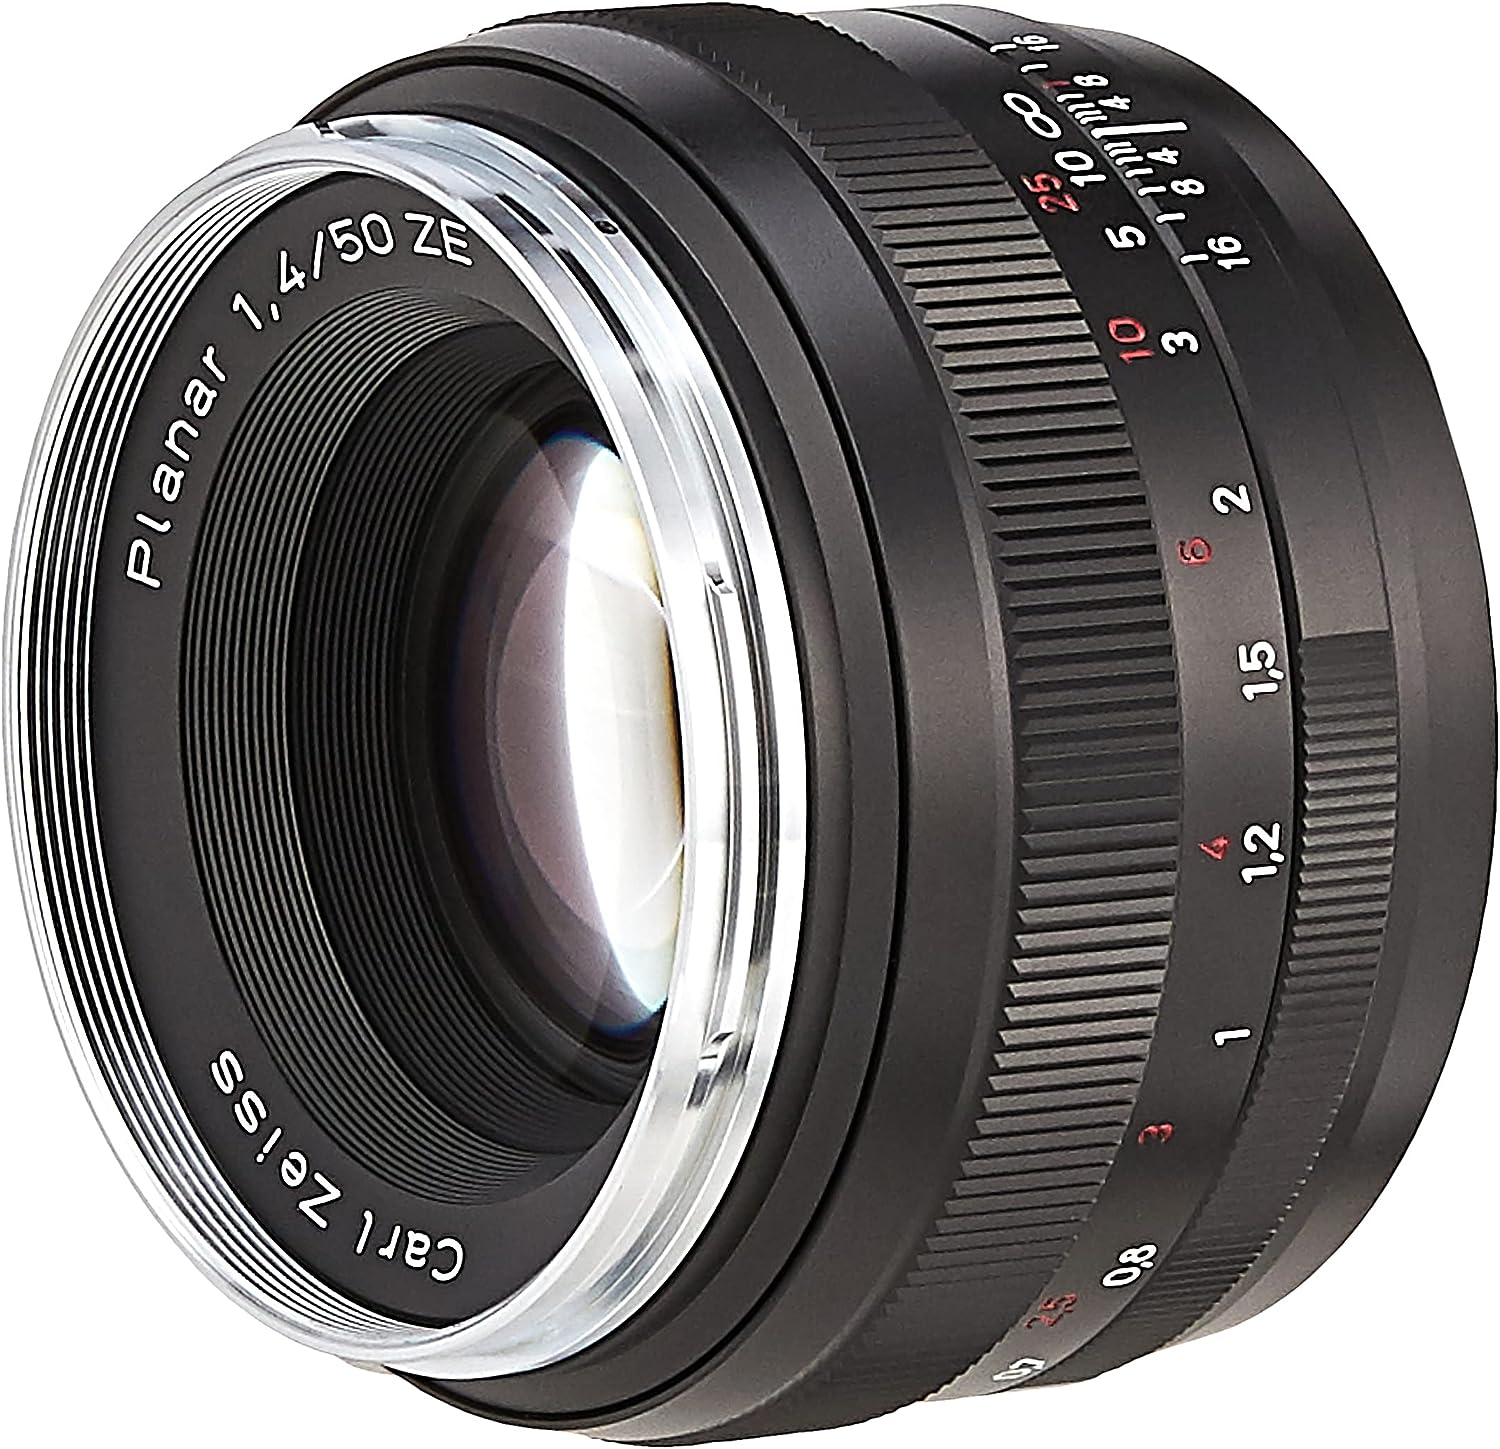 Zeiss Planar T* 50mm f/1.4 ZE Lens for Canon EF